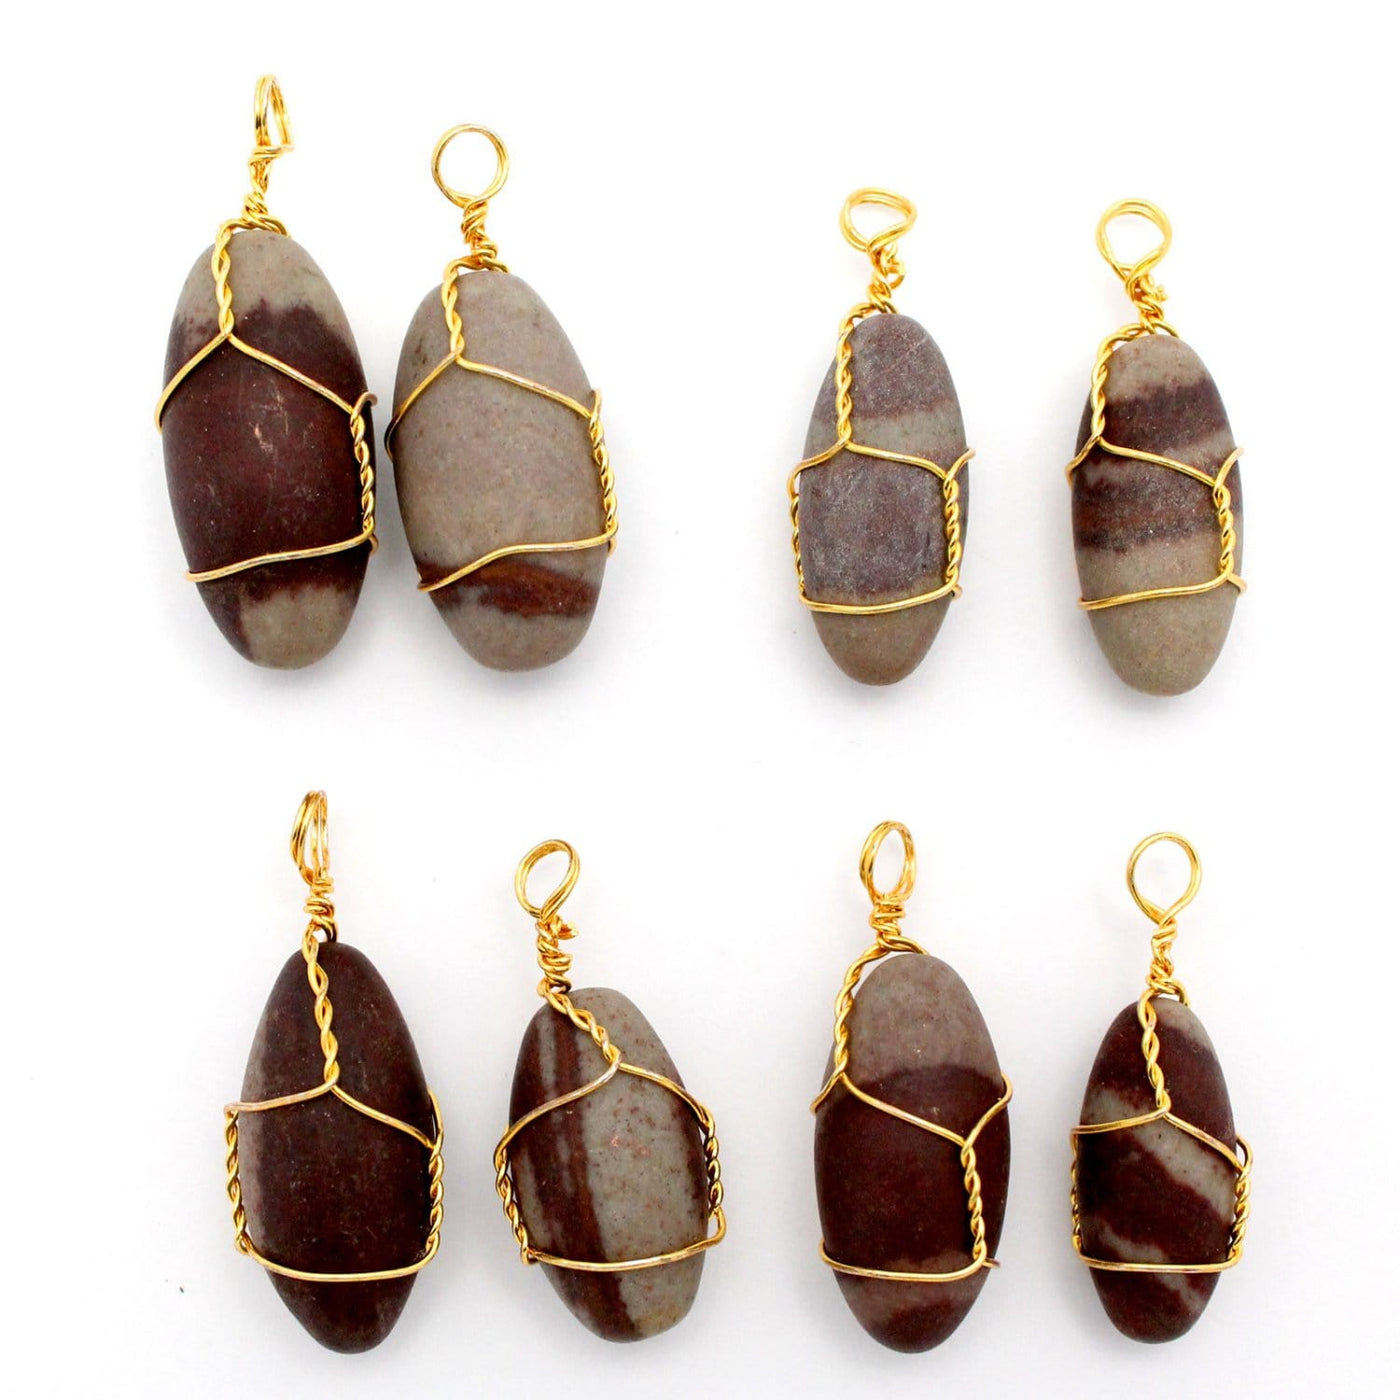 Narmada Lingam Stone Gold Tone Wire Wrapped Pendant  8 lined up